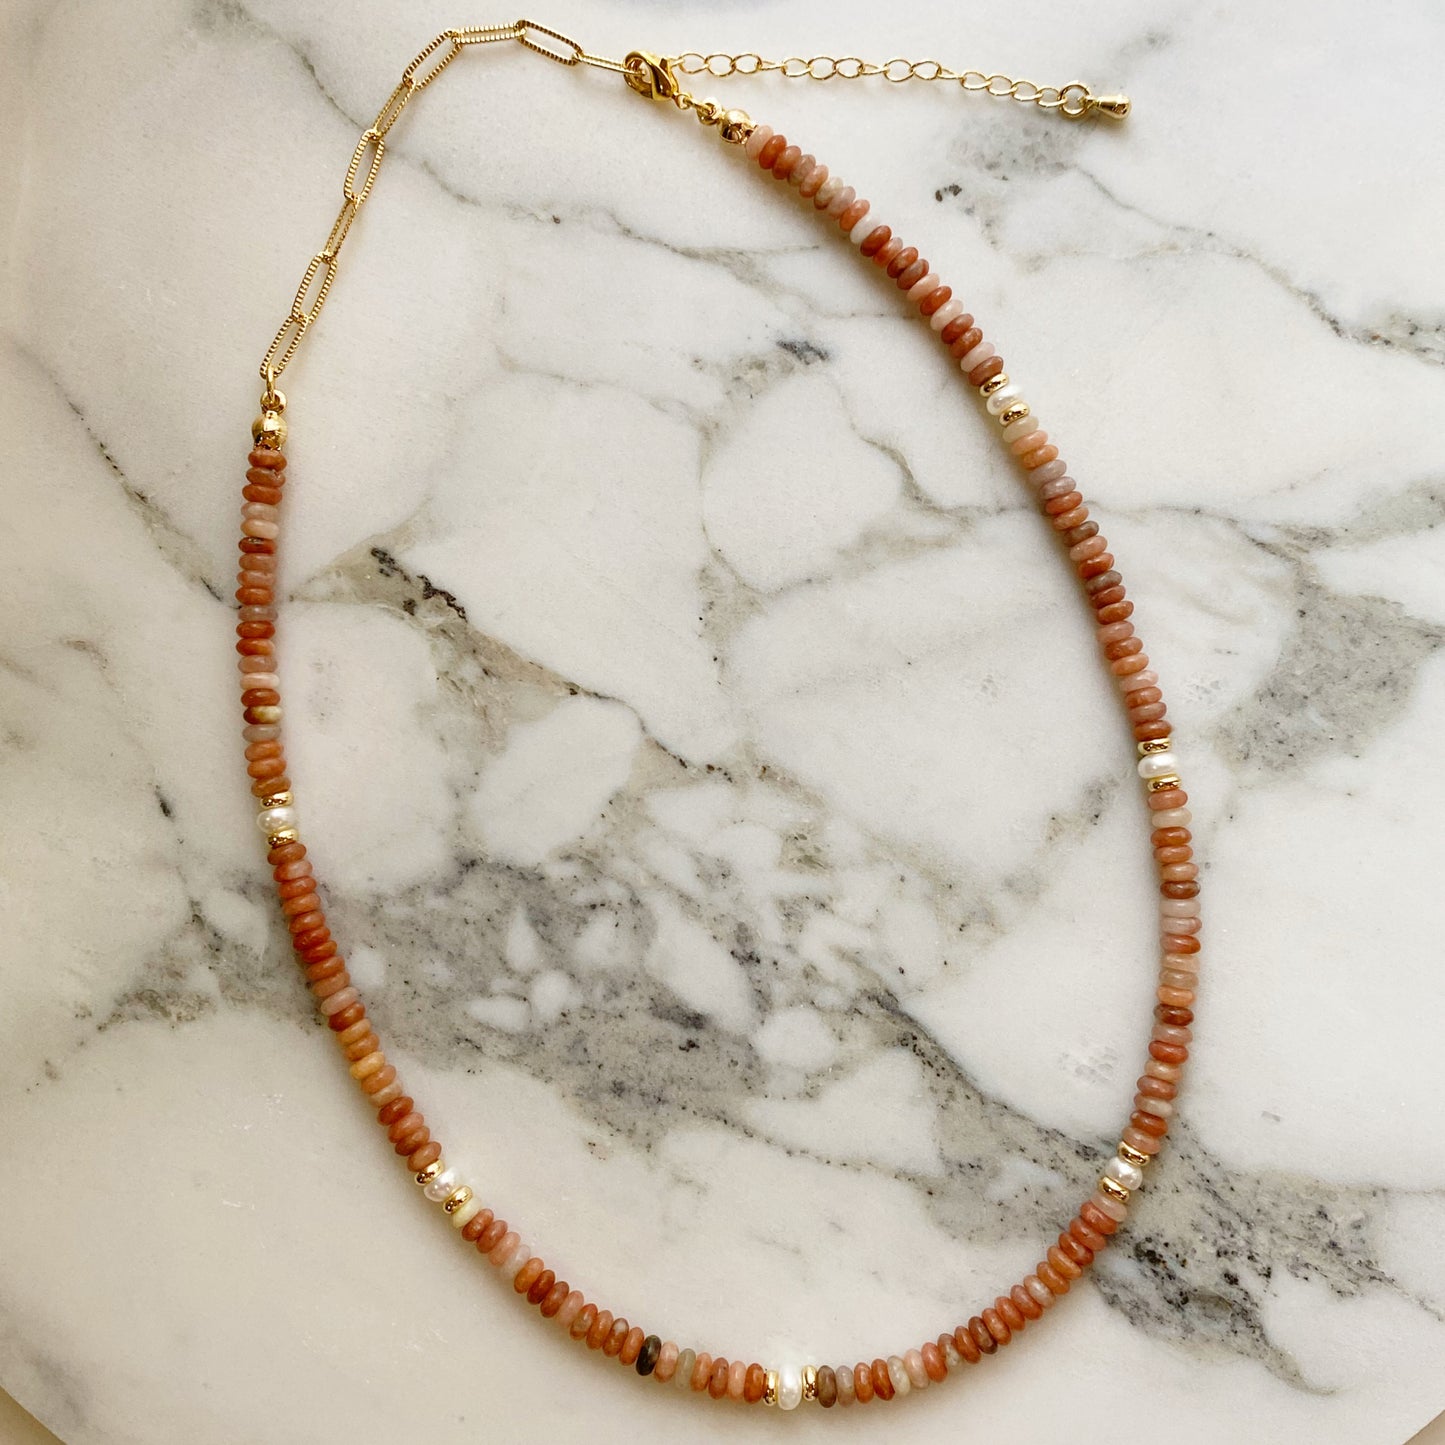 Sunstone Beads with Mini Pearls (14" to 19" length)